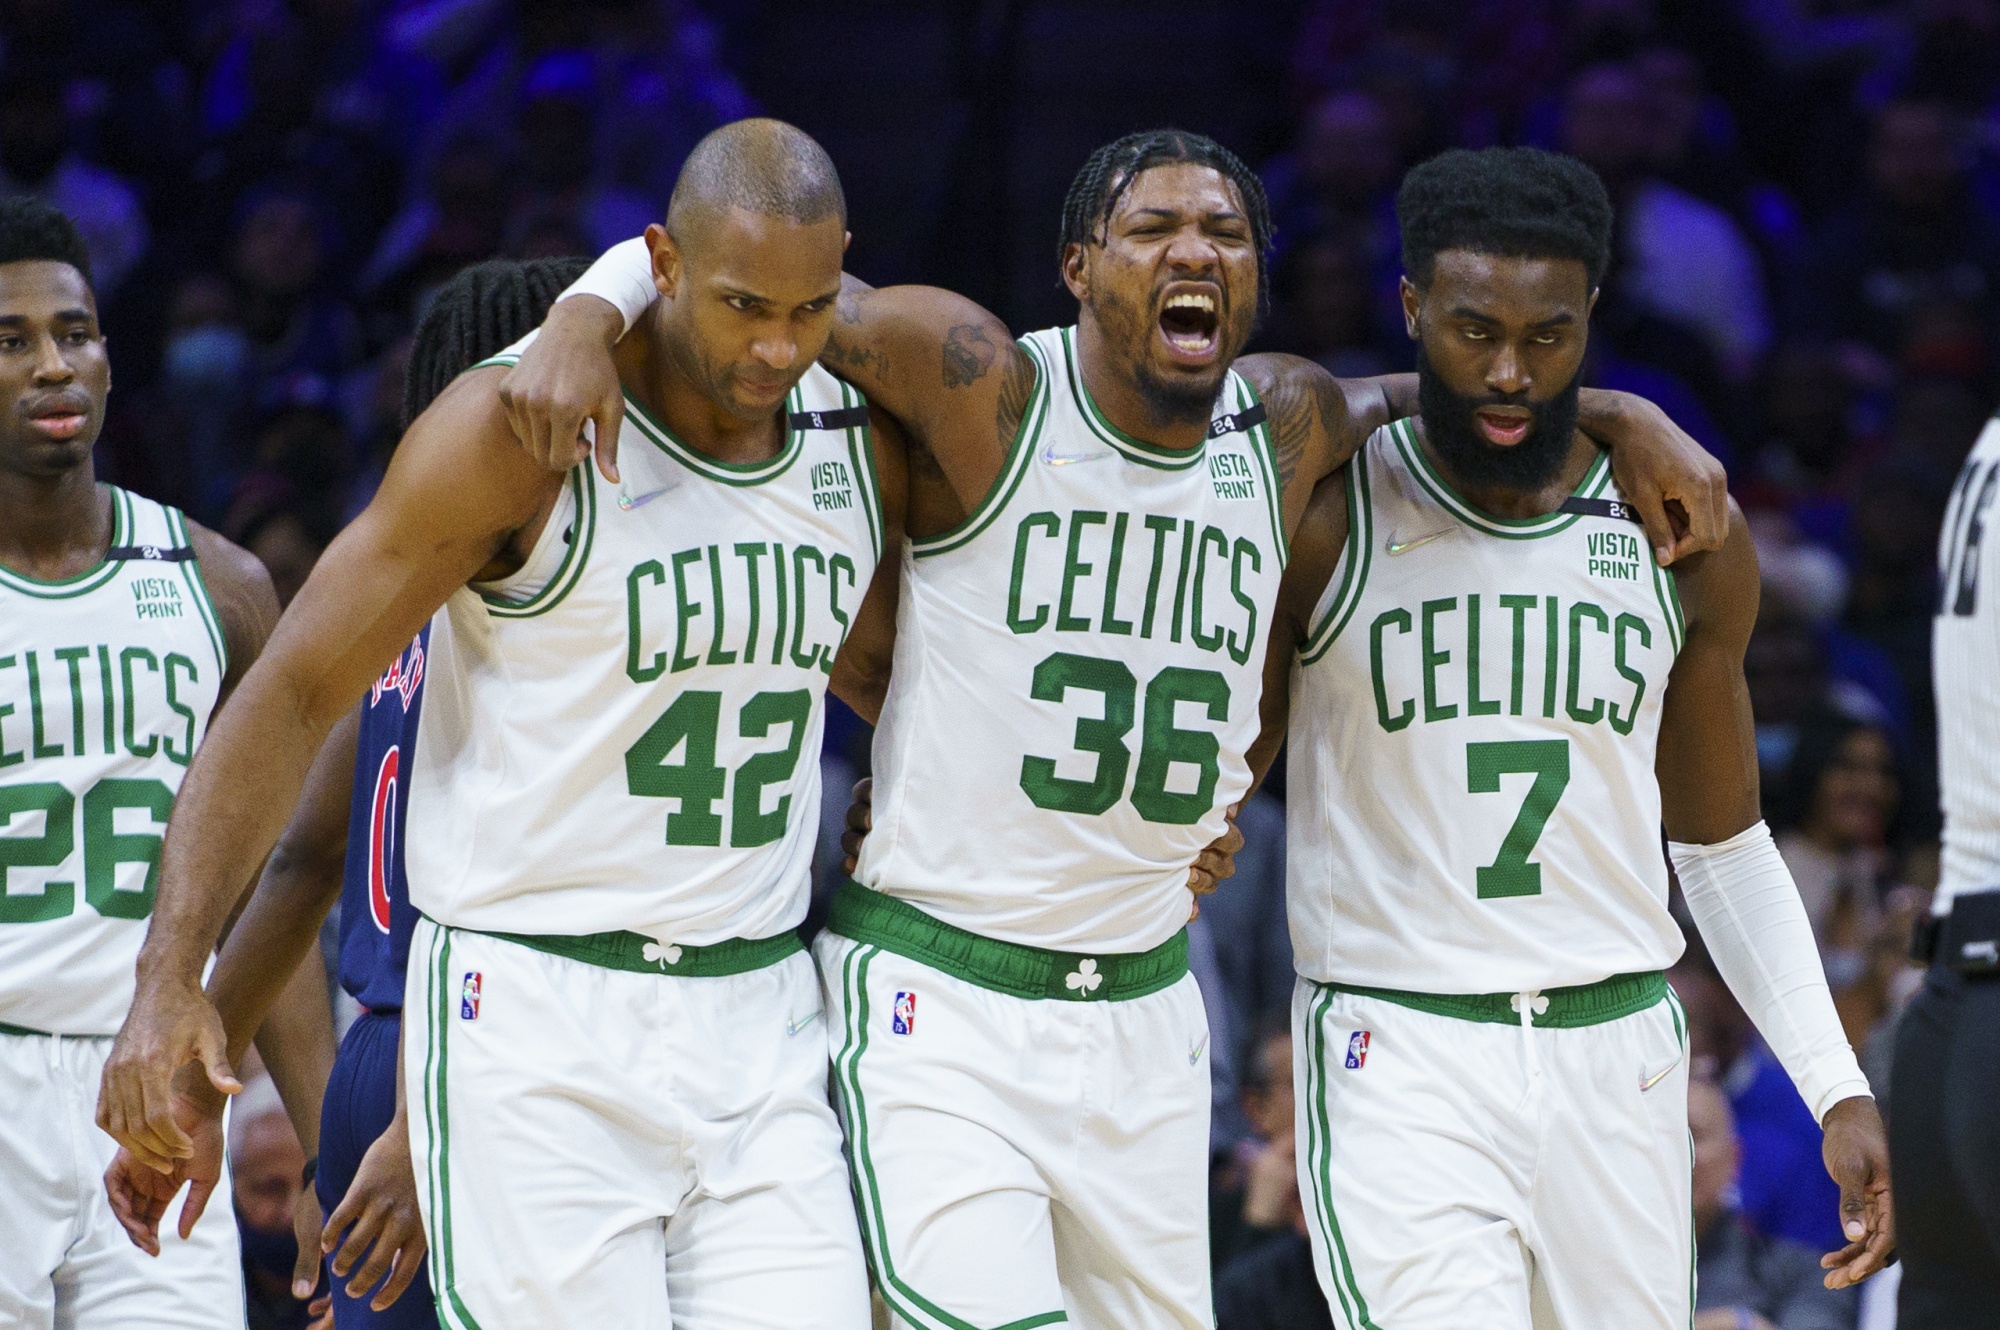 The Bruins and Celtics made history - just in the worst way possible